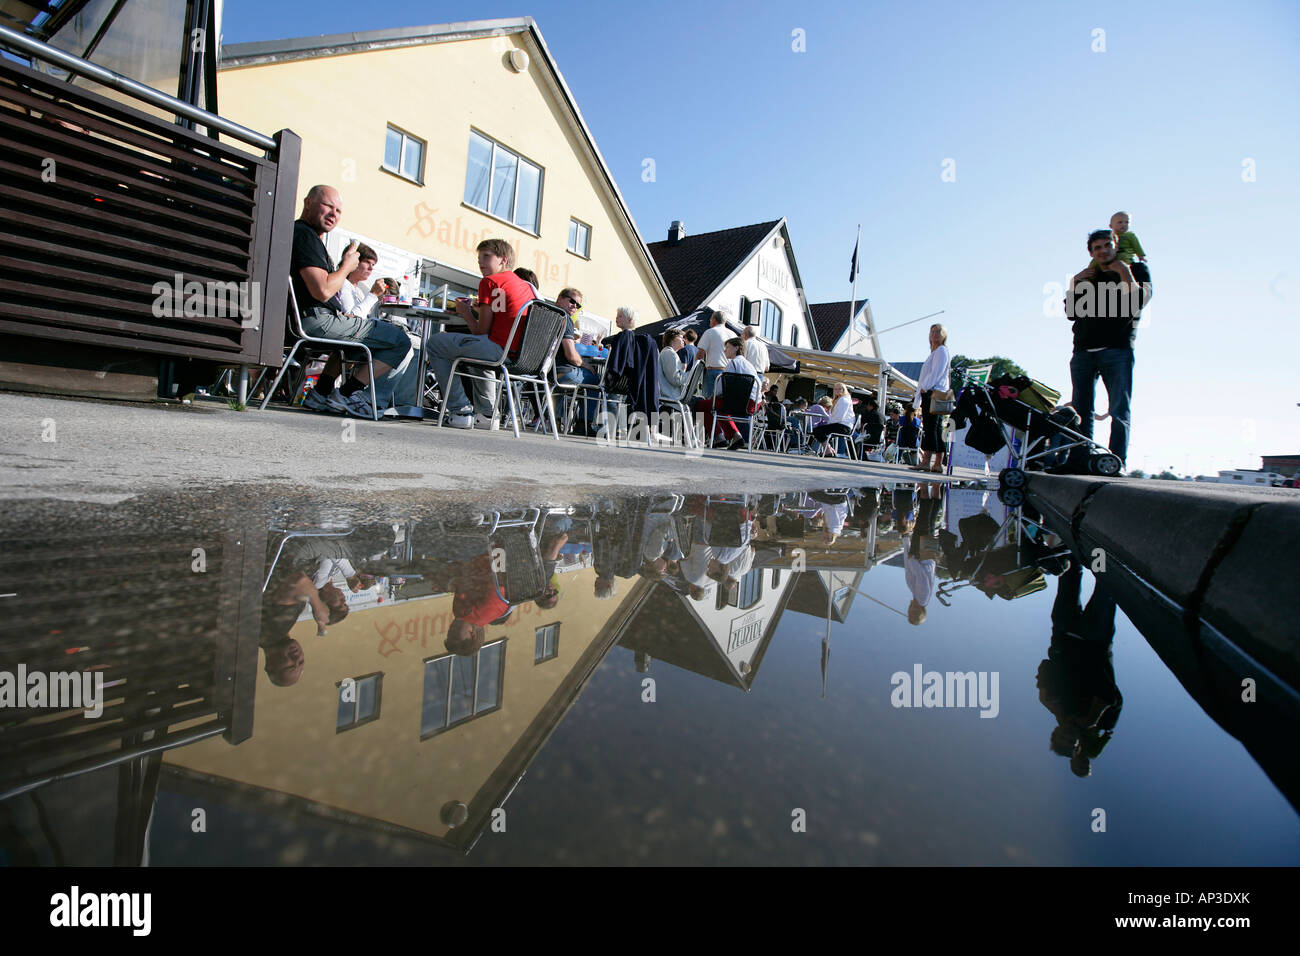 Cafes, quayside promenade, with reflection in a puddle, Visby, Gotland, Sweden Stock Photo